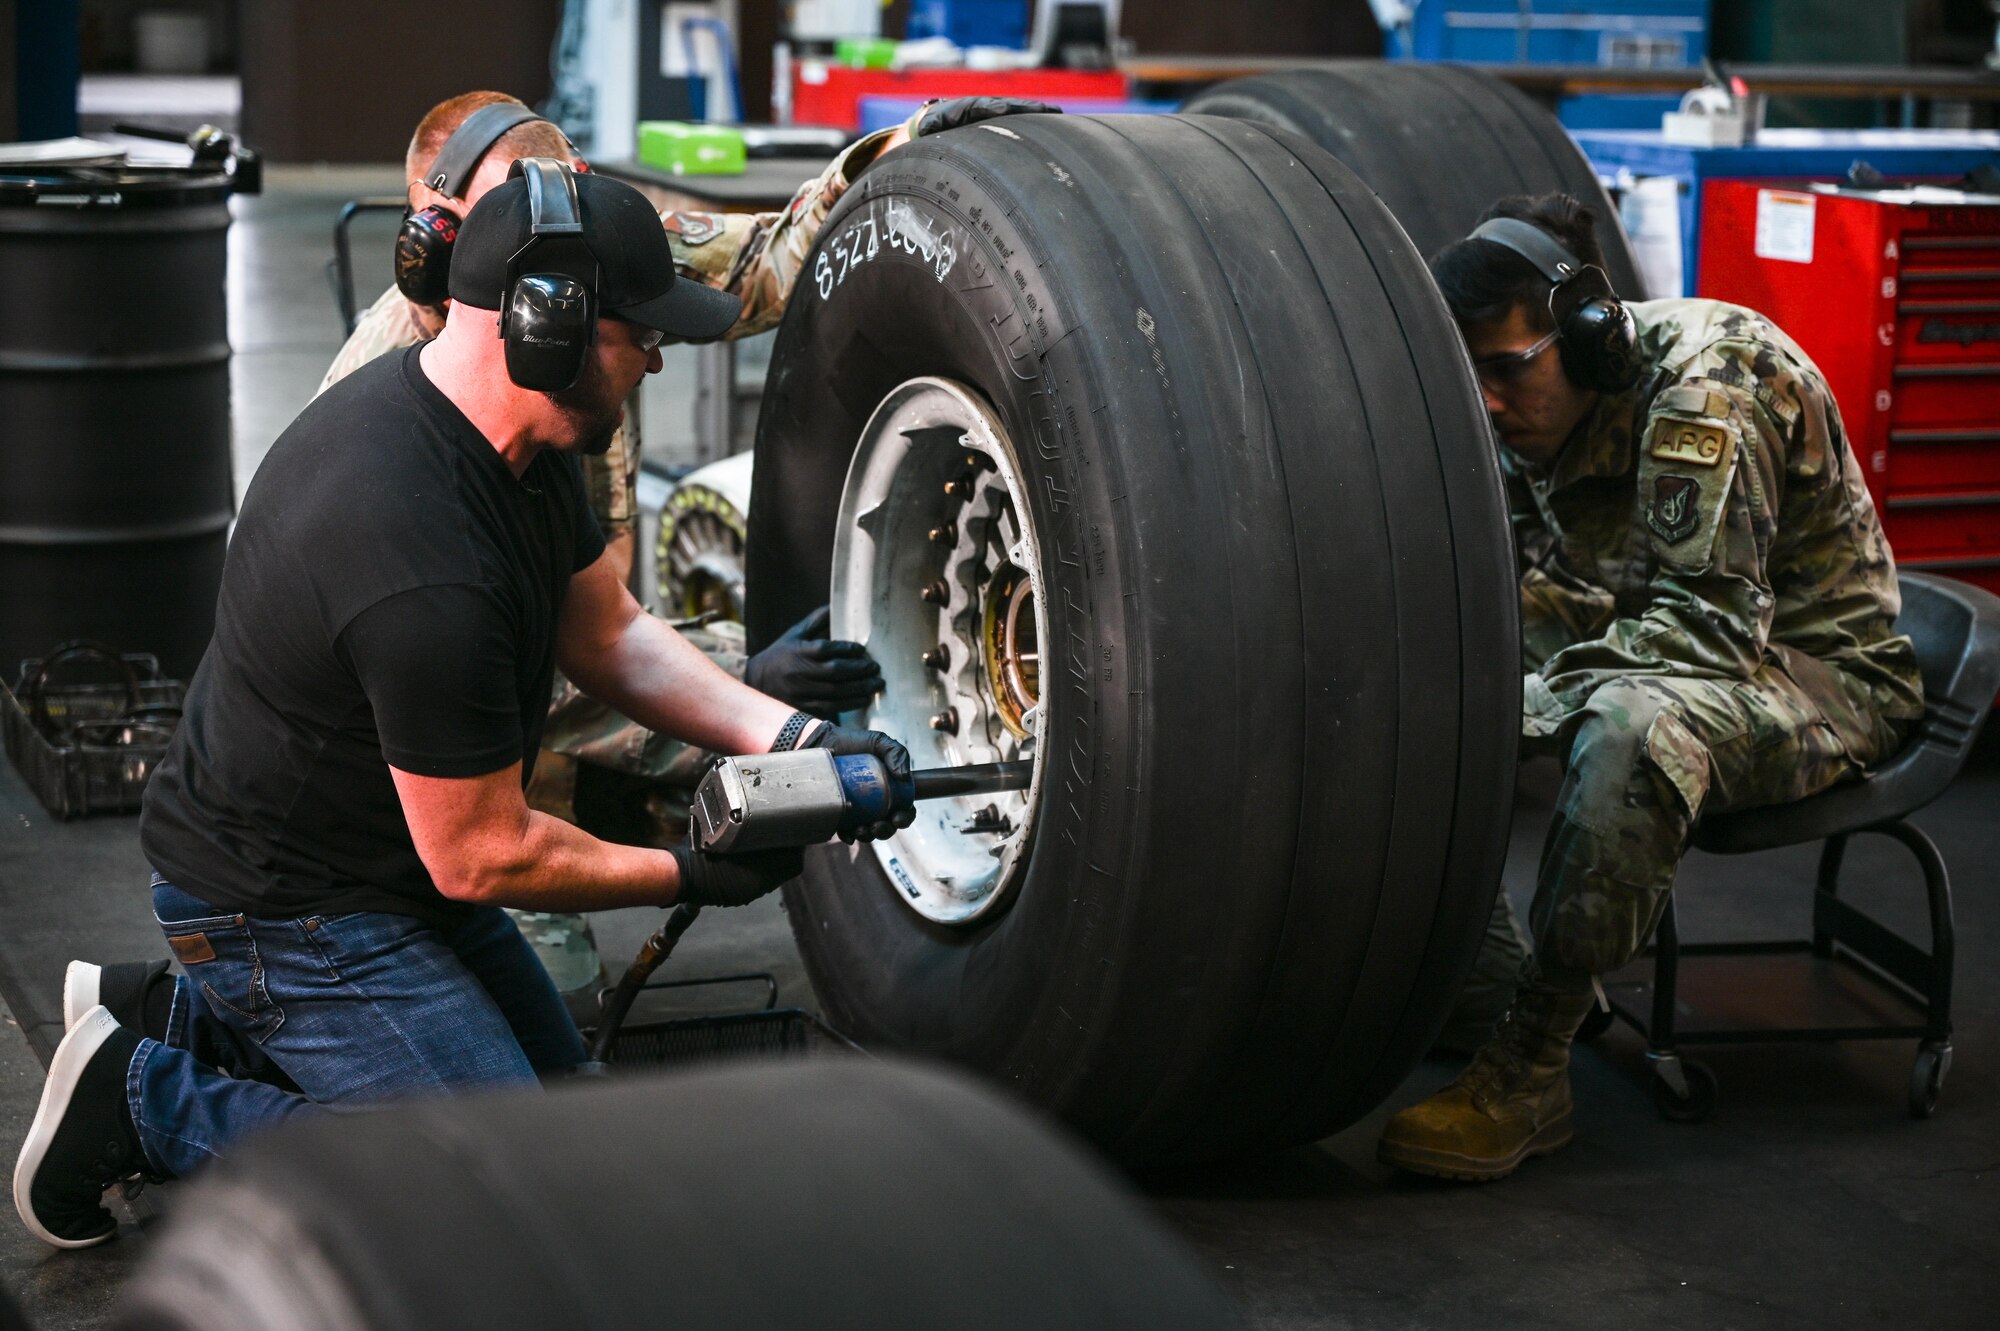 Cody Alan, Country Music Television Radio host and executive producer, detaches bolts from a C-17 Globemaster III tire with Master Sgt. Michael DePue, 15th Maintenance Squadron flight chief, and Airman Joshua Garcia, 15th MXS wheel and tire technician, while filming for CMT’s Hot 20 Annual Holiday Salute to the Troops at Joint Base Pearl Harbor-Hickam, Hawaii, Nov. 29, 2021. Airmen from the aircraft structural, metals technology, and wheel and tire sections from the 15 MXS highlighted how they enable the C-17 to carry out airlift missions. (U.S. Air Force photo by Staff Sgt. Alan Ricker)